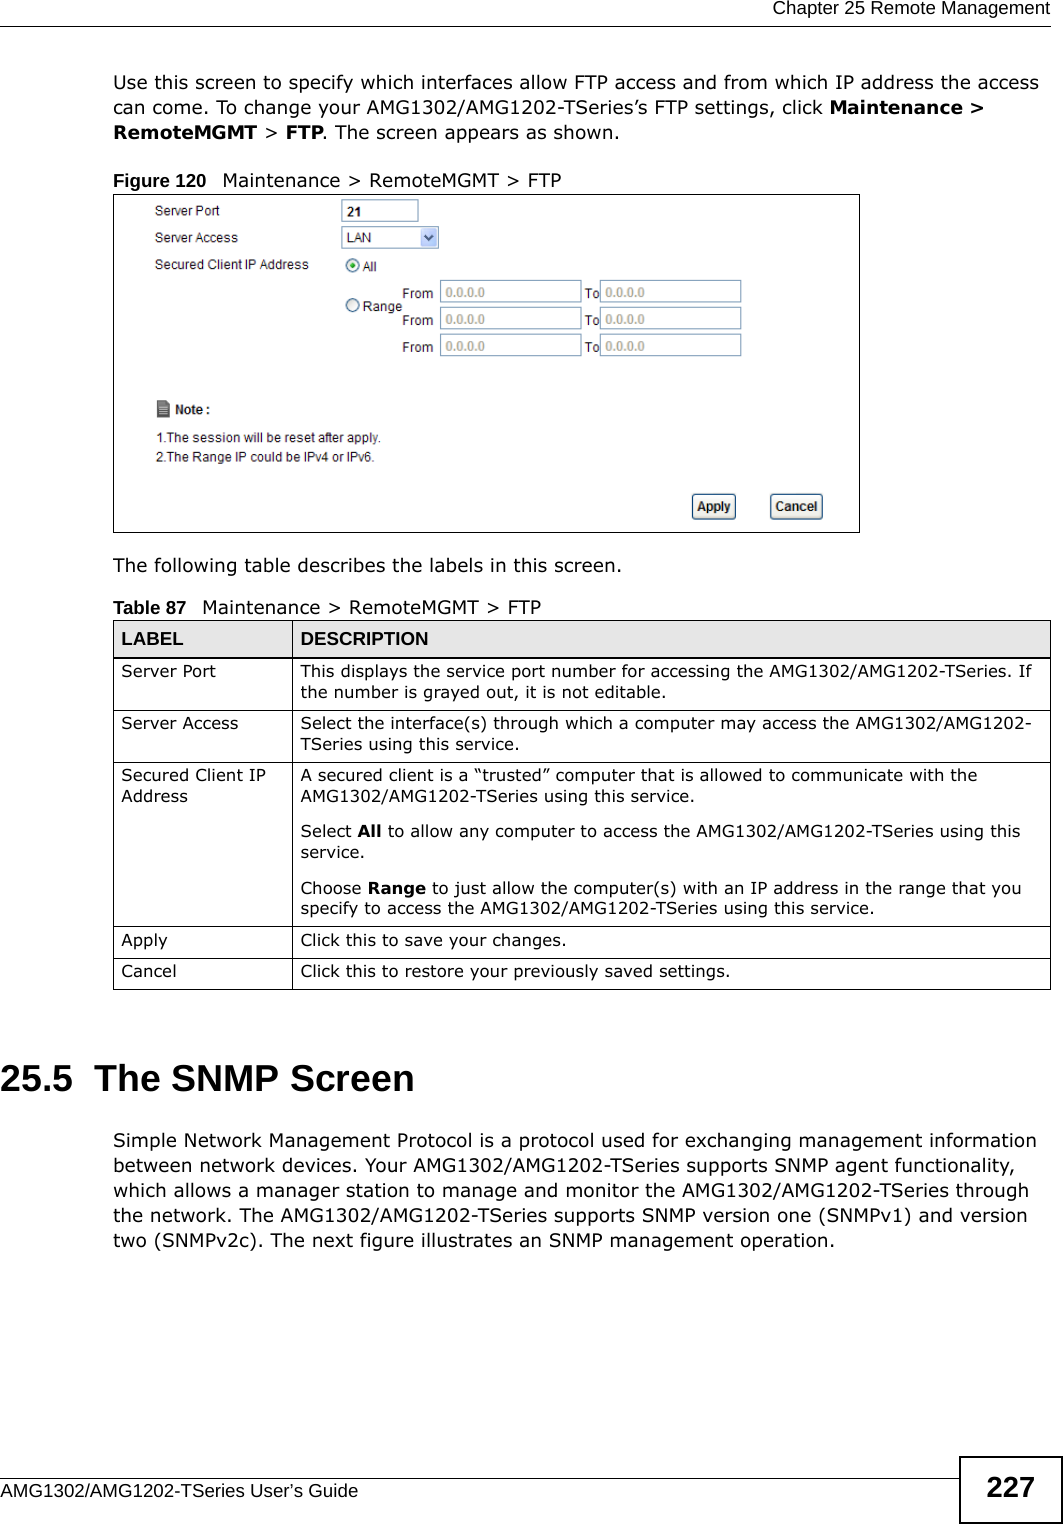  Chapter 25 Remote ManagementAMG1302/AMG1202-TSeries User’s Guide 227Use this screen to specify which interfaces allow FTP access and from which IP address the access can come. To change your AMG1302/AMG1202-TSeries’s FTP settings, click Maintenance &gt; RemoteMGMT &gt; FTP. The screen appears as shown.Figure 120   Maintenance &gt; RemoteMGMT &gt; FTPThe following table describes the labels in this screen. 25.5  The SNMP ScreenSimple Network Management Protocol is a protocol used for exchanging management information between network devices. Your AMG1302/AMG1202-TSeries supports SNMP agent functionality, which allows a manager station to manage and monitor the AMG1302/AMG1202-TSeries through the network. The AMG1302/AMG1202-TSeries supports SNMP version one (SNMPv1) and version two (SNMPv2c). The next figure illustrates an SNMP management operation.Table 87   Maintenance &gt; RemoteMGMT &gt; FTPLABEL DESCRIPTIONServer Port This displays the service port number for accessing the AMG1302/AMG1202-TSeries. If the number is grayed out, it is not editable.Server Access Select the interface(s) through which a computer may access the AMG1302/AMG1202-TSeries using this service.Secured Client IP AddressA secured client is a “trusted” computer that is allowed to communicate with the AMG1302/AMG1202-TSeries using this service. Select All to allow any computer to access the AMG1302/AMG1202-TSeries using this service.Choose Range to just allow the computer(s) with an IP address in the range that you specify to access the AMG1302/AMG1202-TSeries using this service.Apply Click this to save your changes.Cancel Click this to restore your previously saved settings.